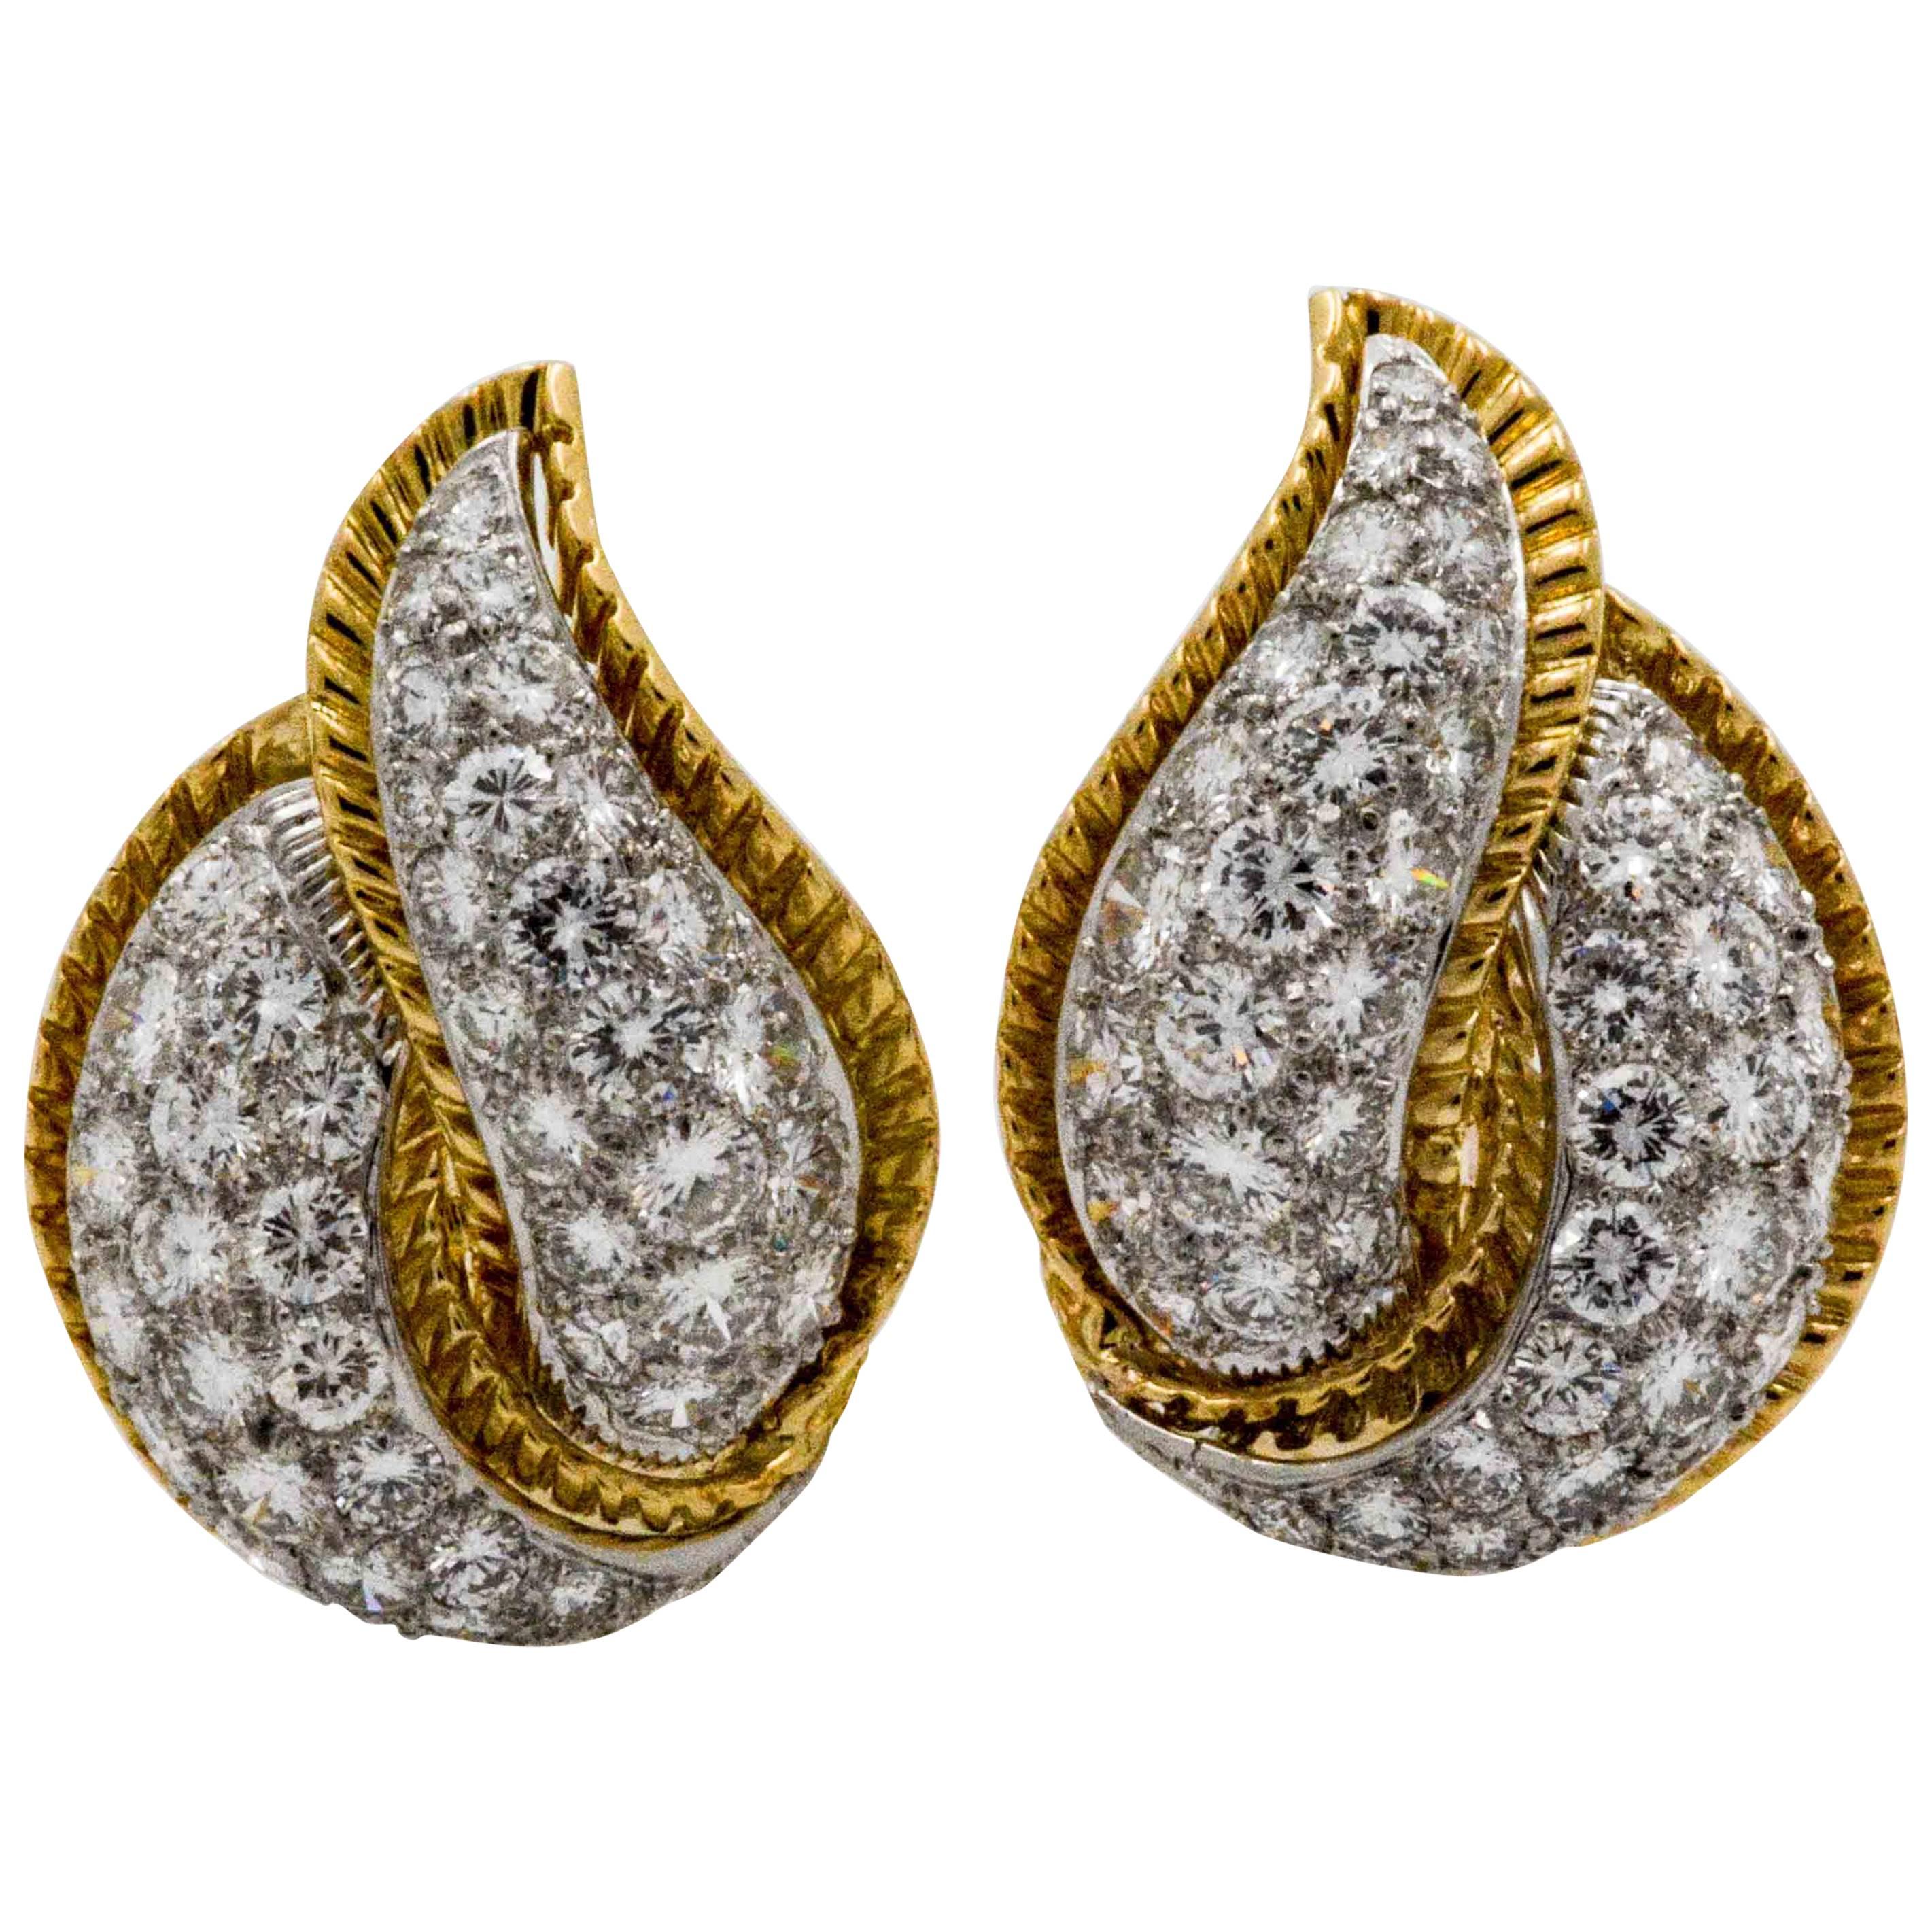 From the French designer, Modele Sterle, these circa 1970s earrings are decorated wtih 96 pave round brilliant cut diamonds, weighing a total of 5.25 carats. The diamonds are surrounded by a textured 18k yellow gold design, creating a leaf pattern.